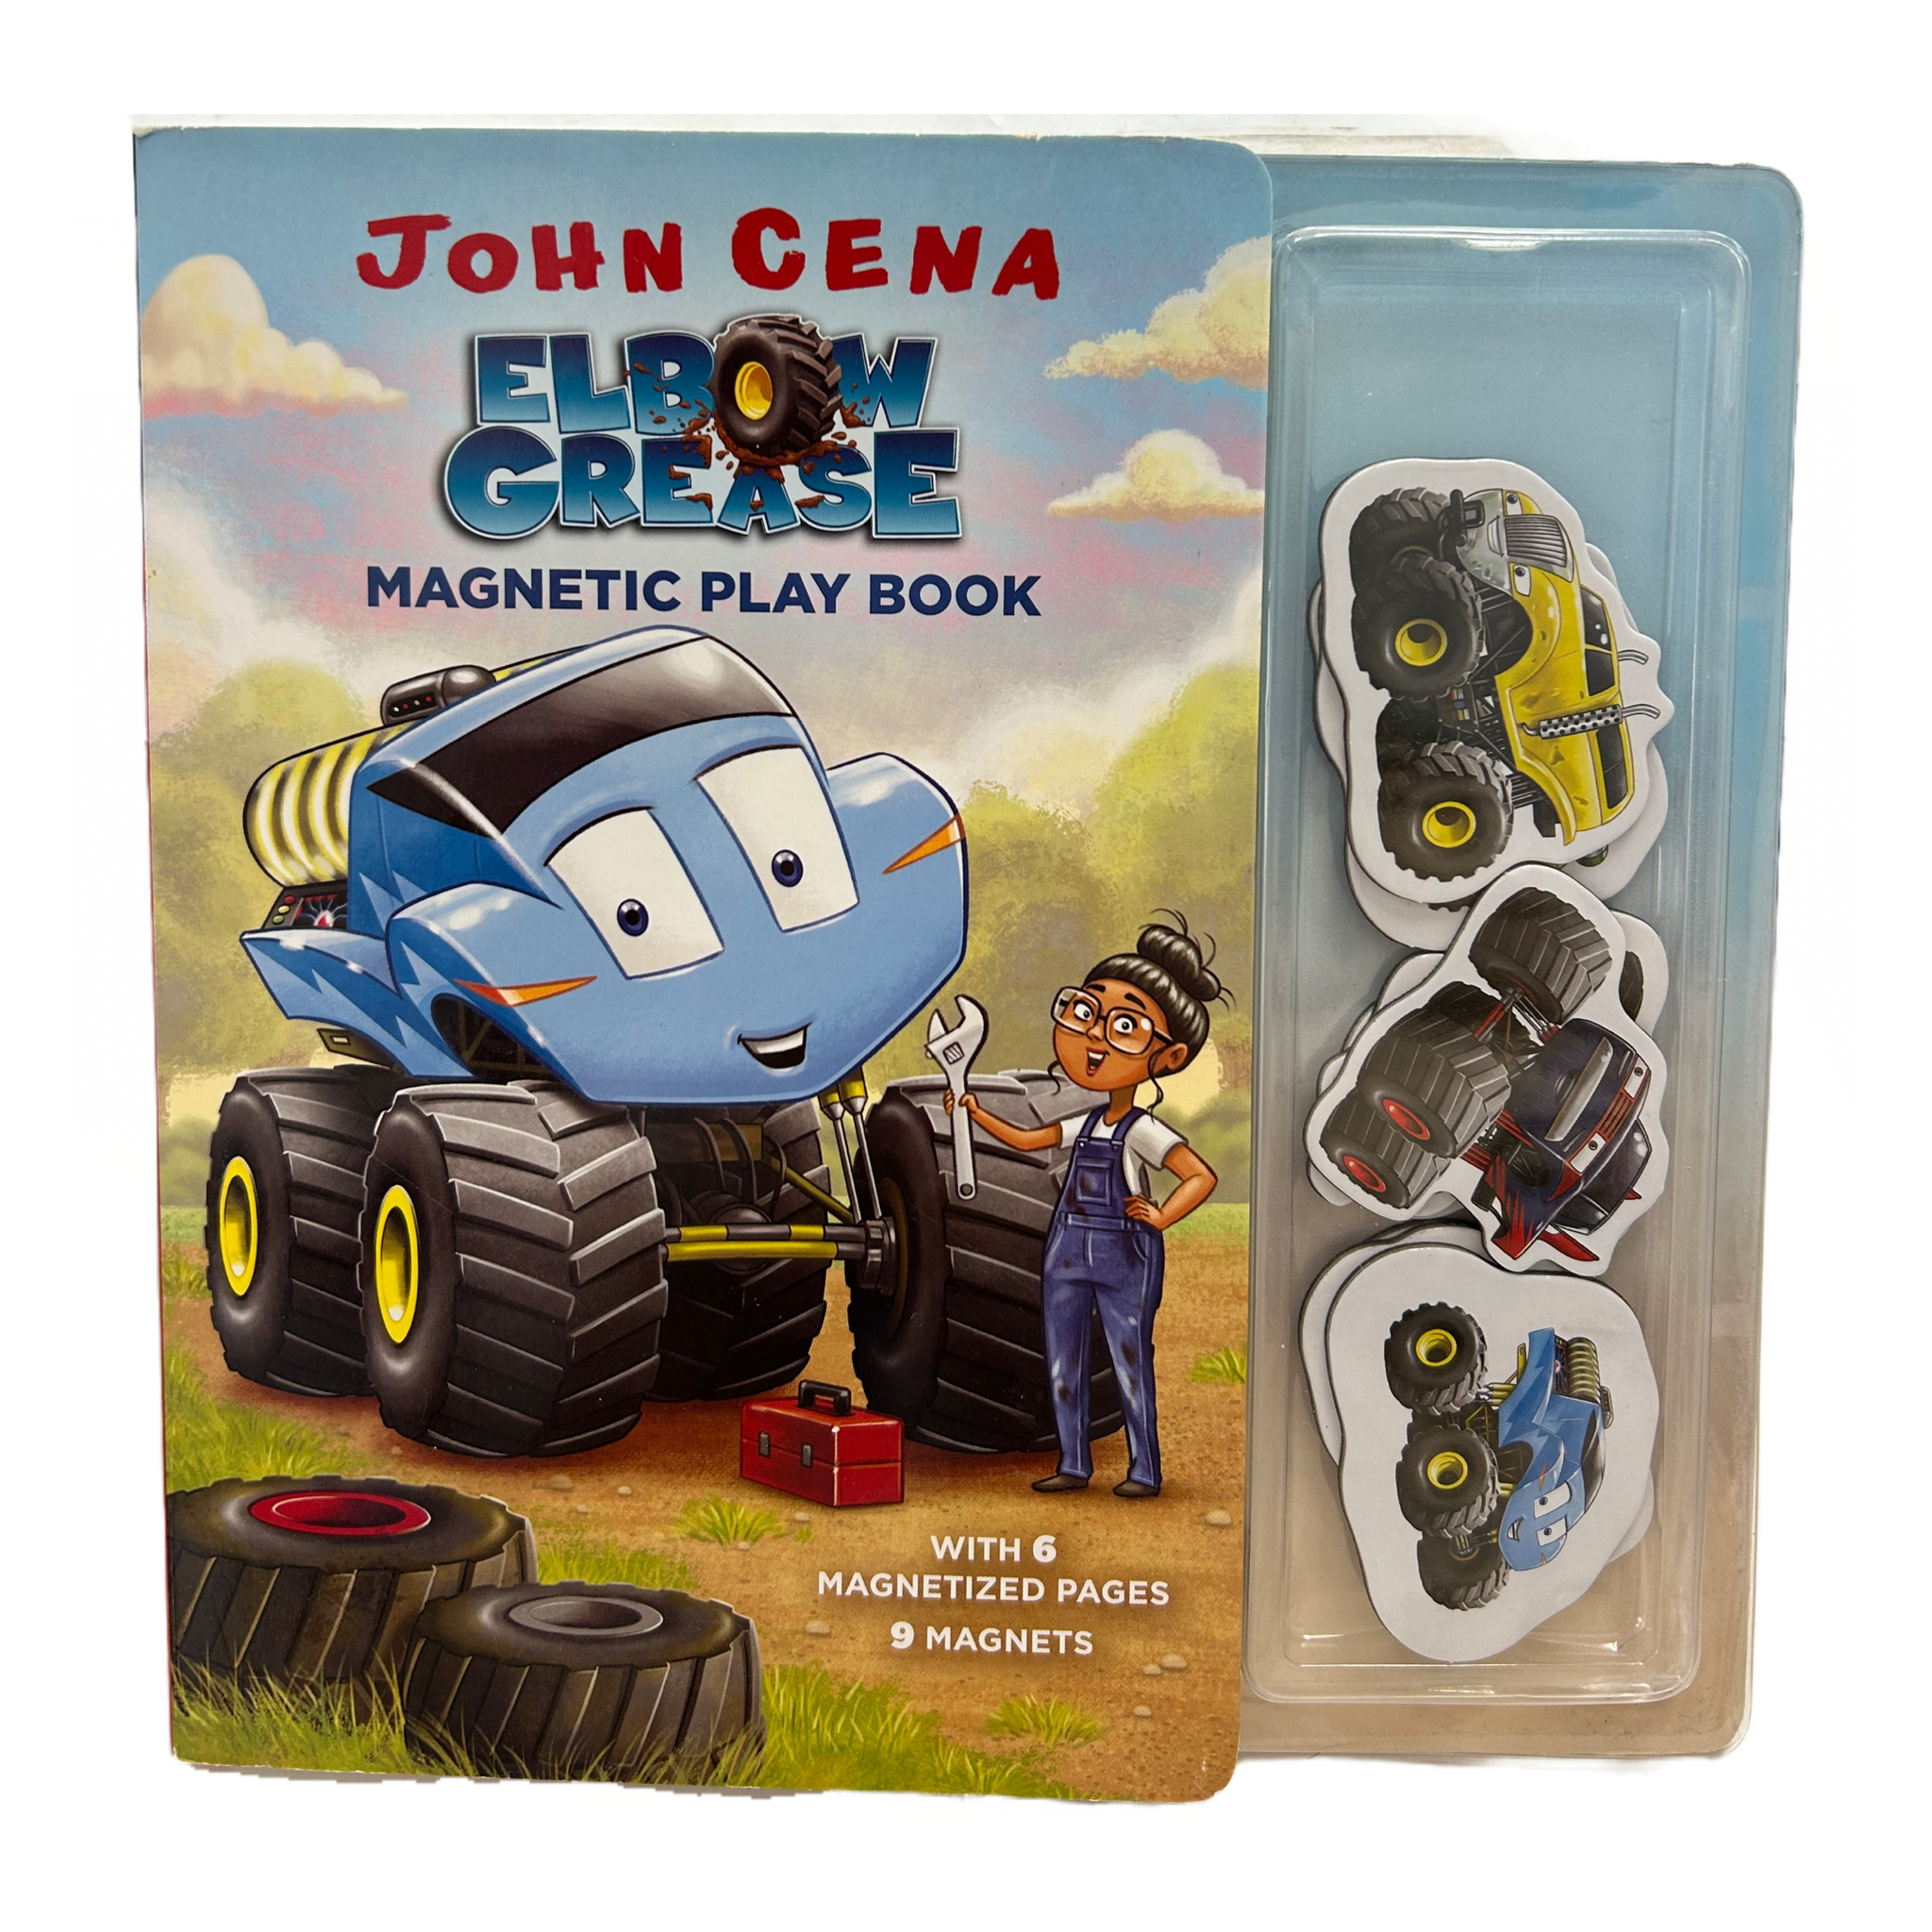 Elbow Grease Magnetic Play Book